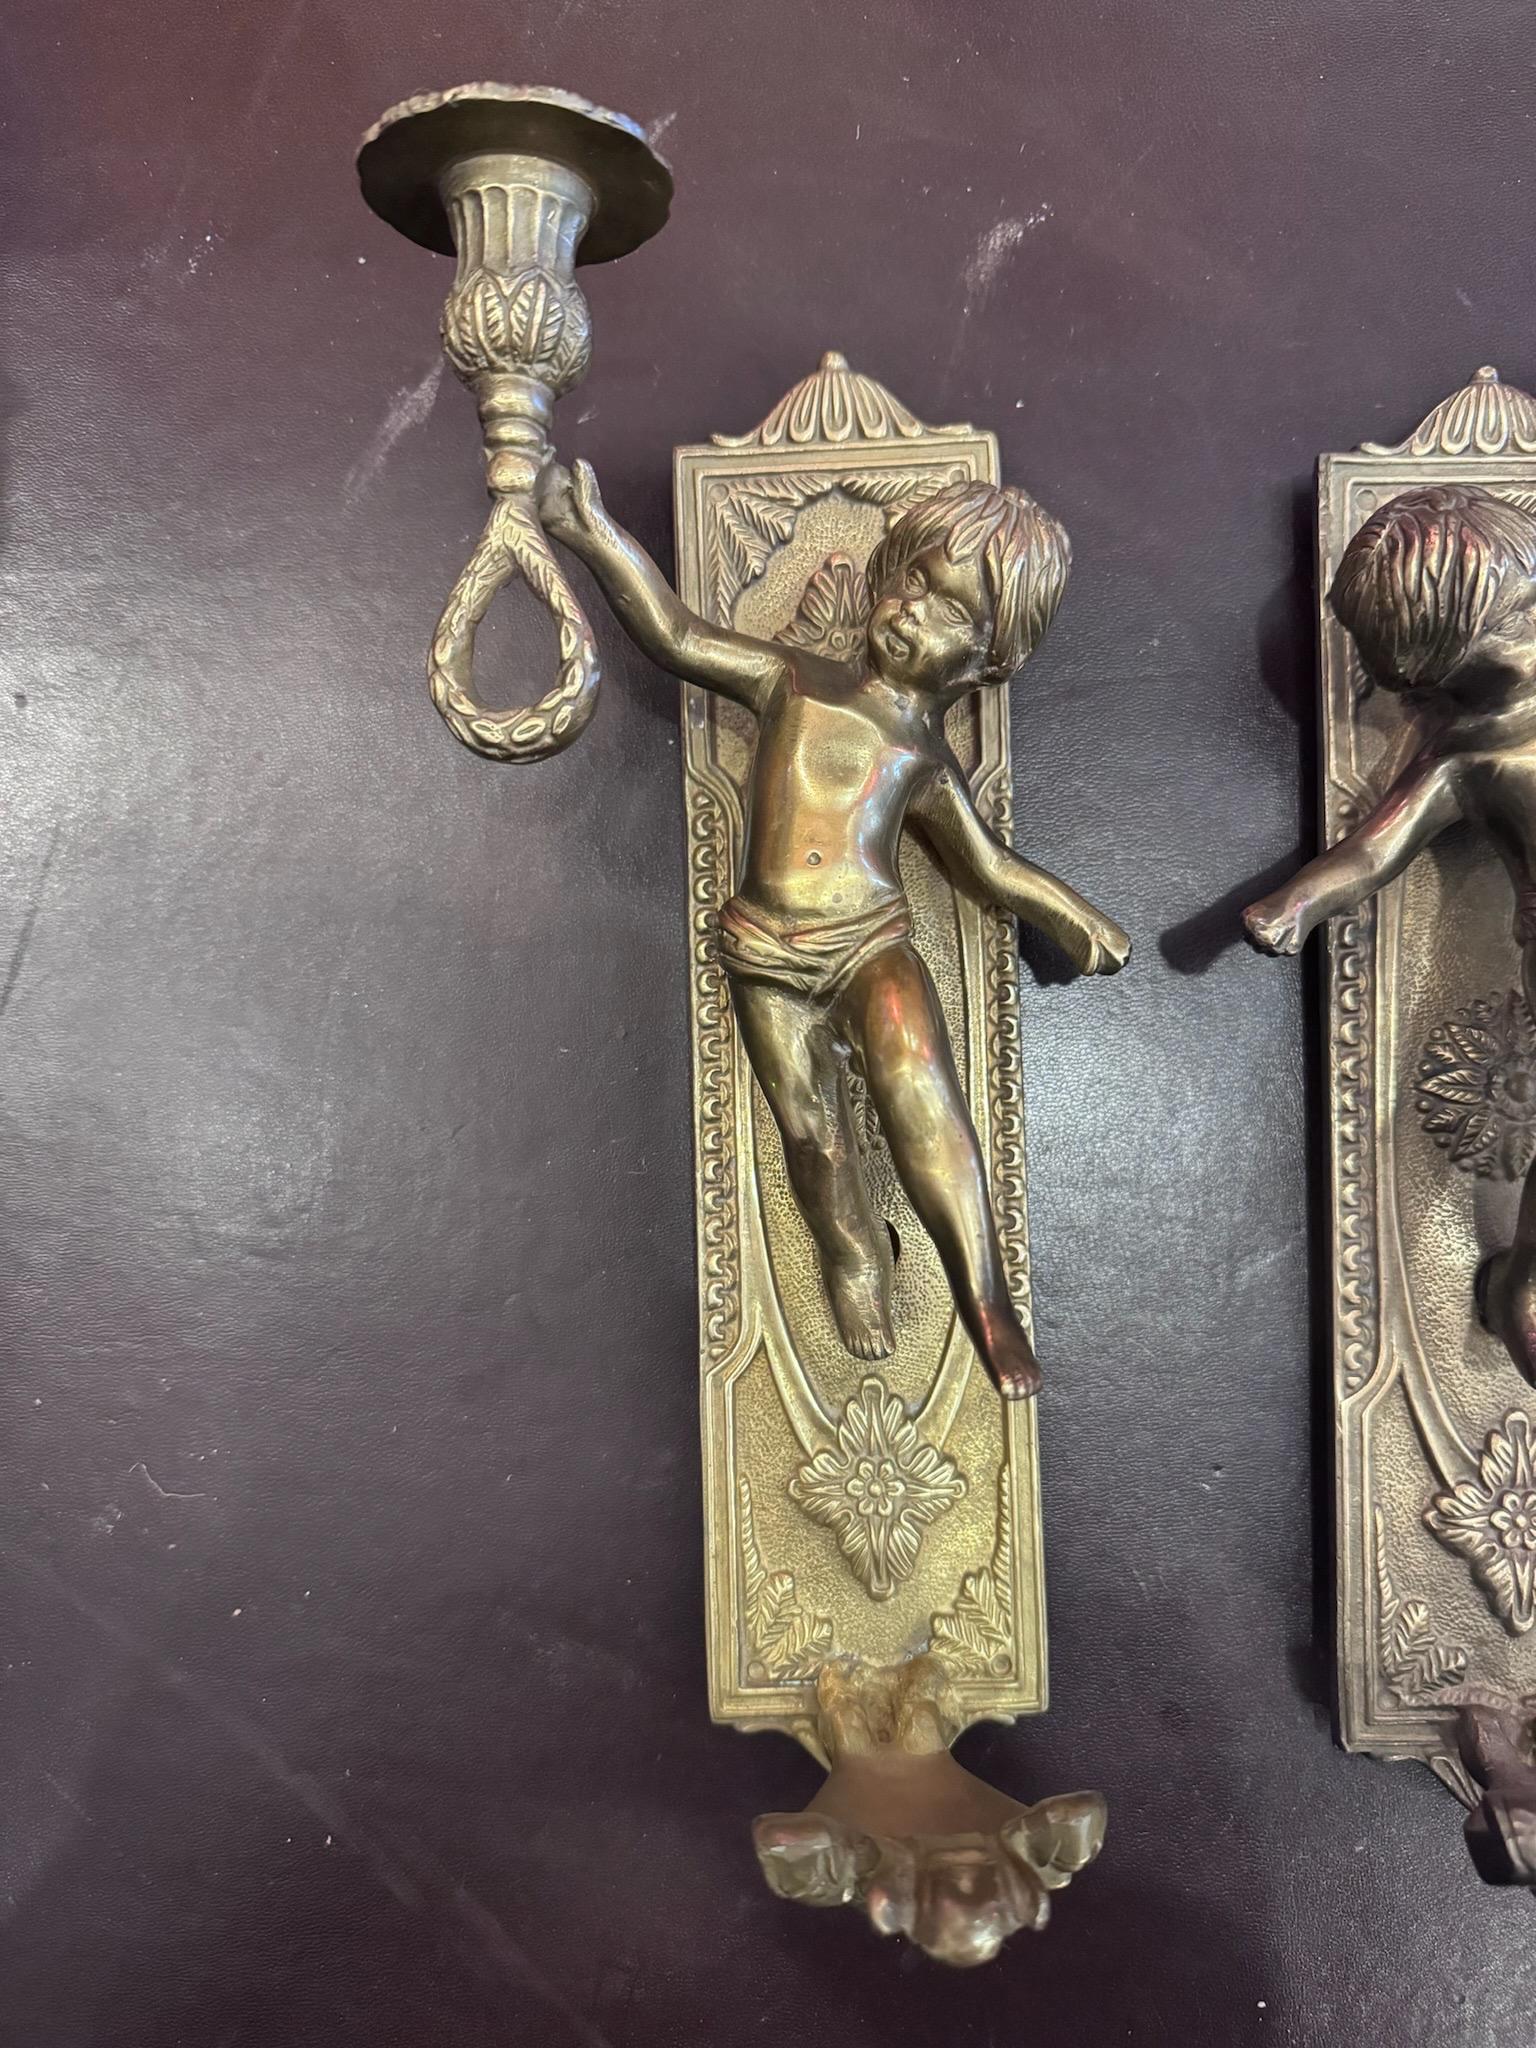 Empire Vintage Brass Putti Cherub Angel Wall Mounted Sconces Candle Holders - Set of 2 For Sale